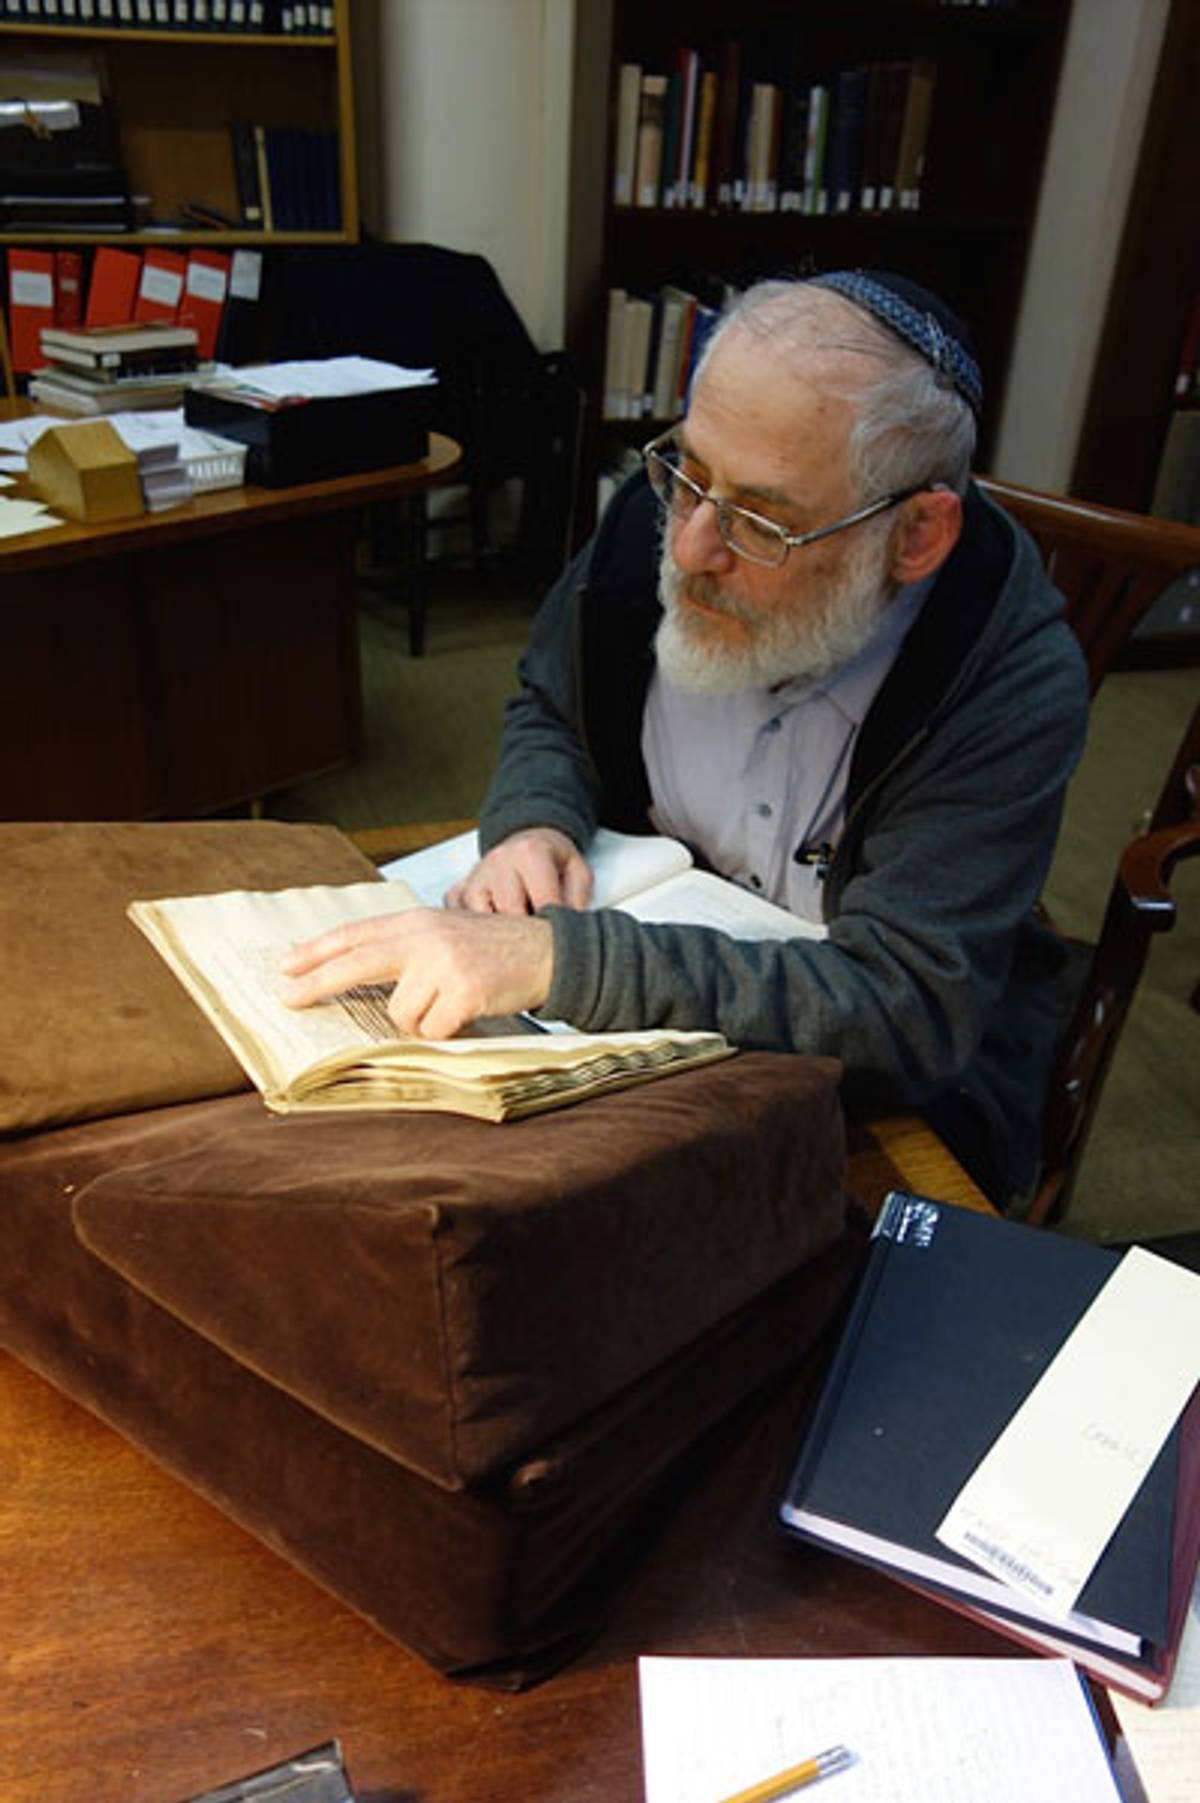 Jay Rovner, manuscripts bibliographer at the Jewish Theological Seminary Library in New York, examines a volume confirmed by internal stamps to have belonged to the Jewish library of Rome. (All photos: Michael Frank)